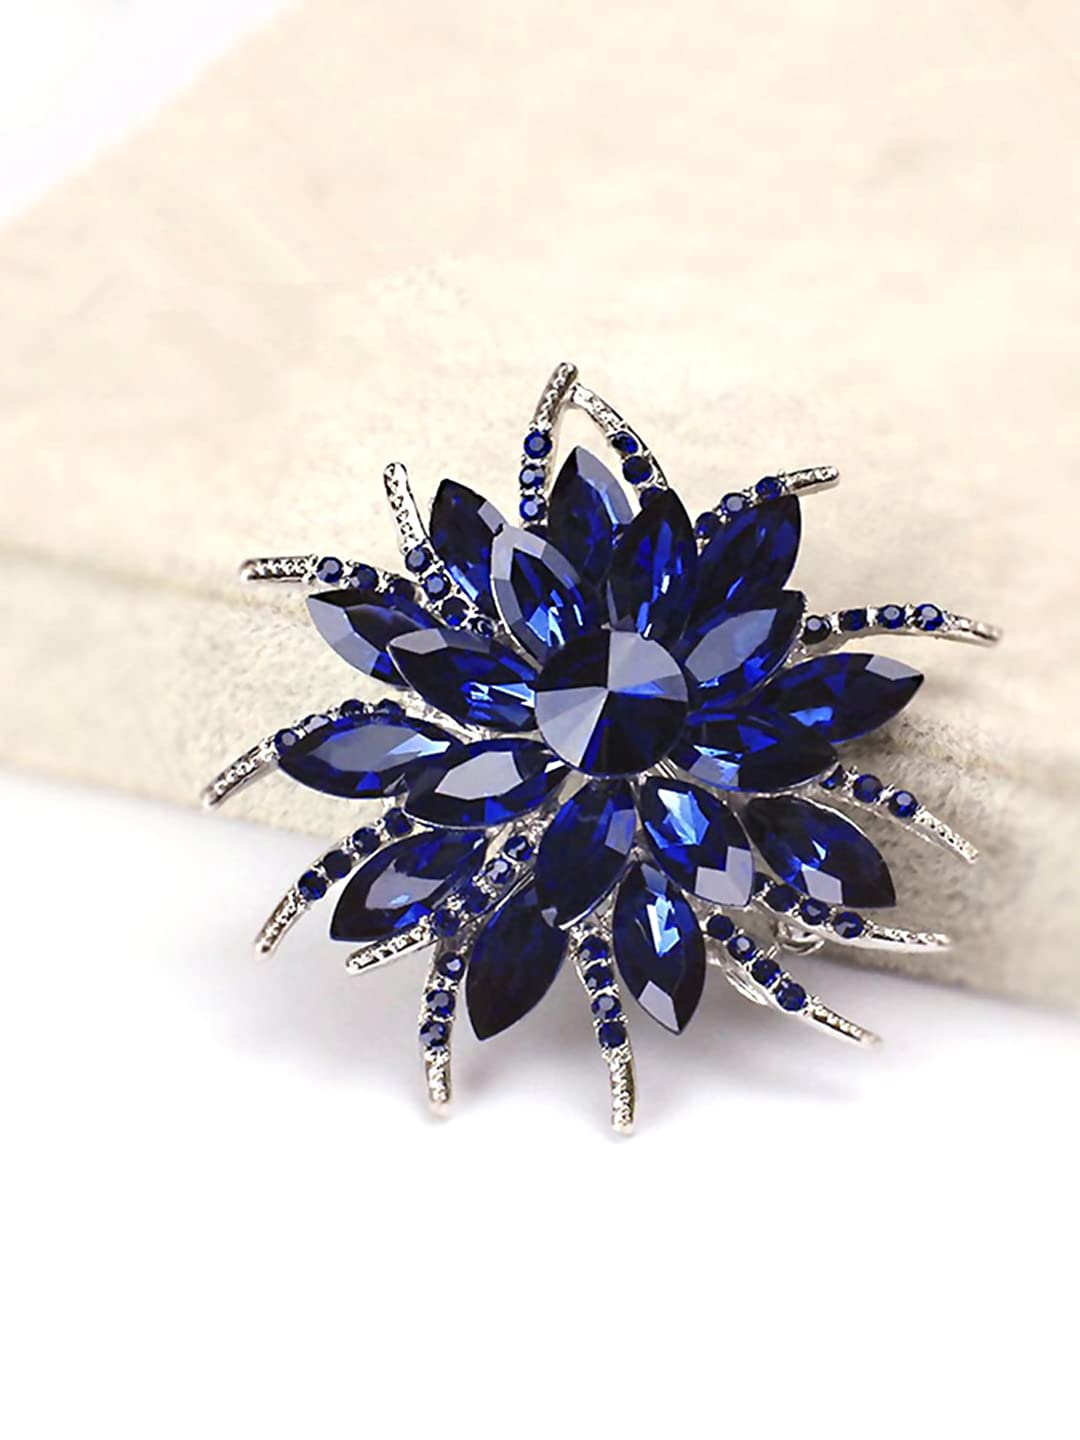 Yellow Chimes Floral Brooch for Women Elegant Blue Crystal Floral Shaped Brooch for Women and Girls